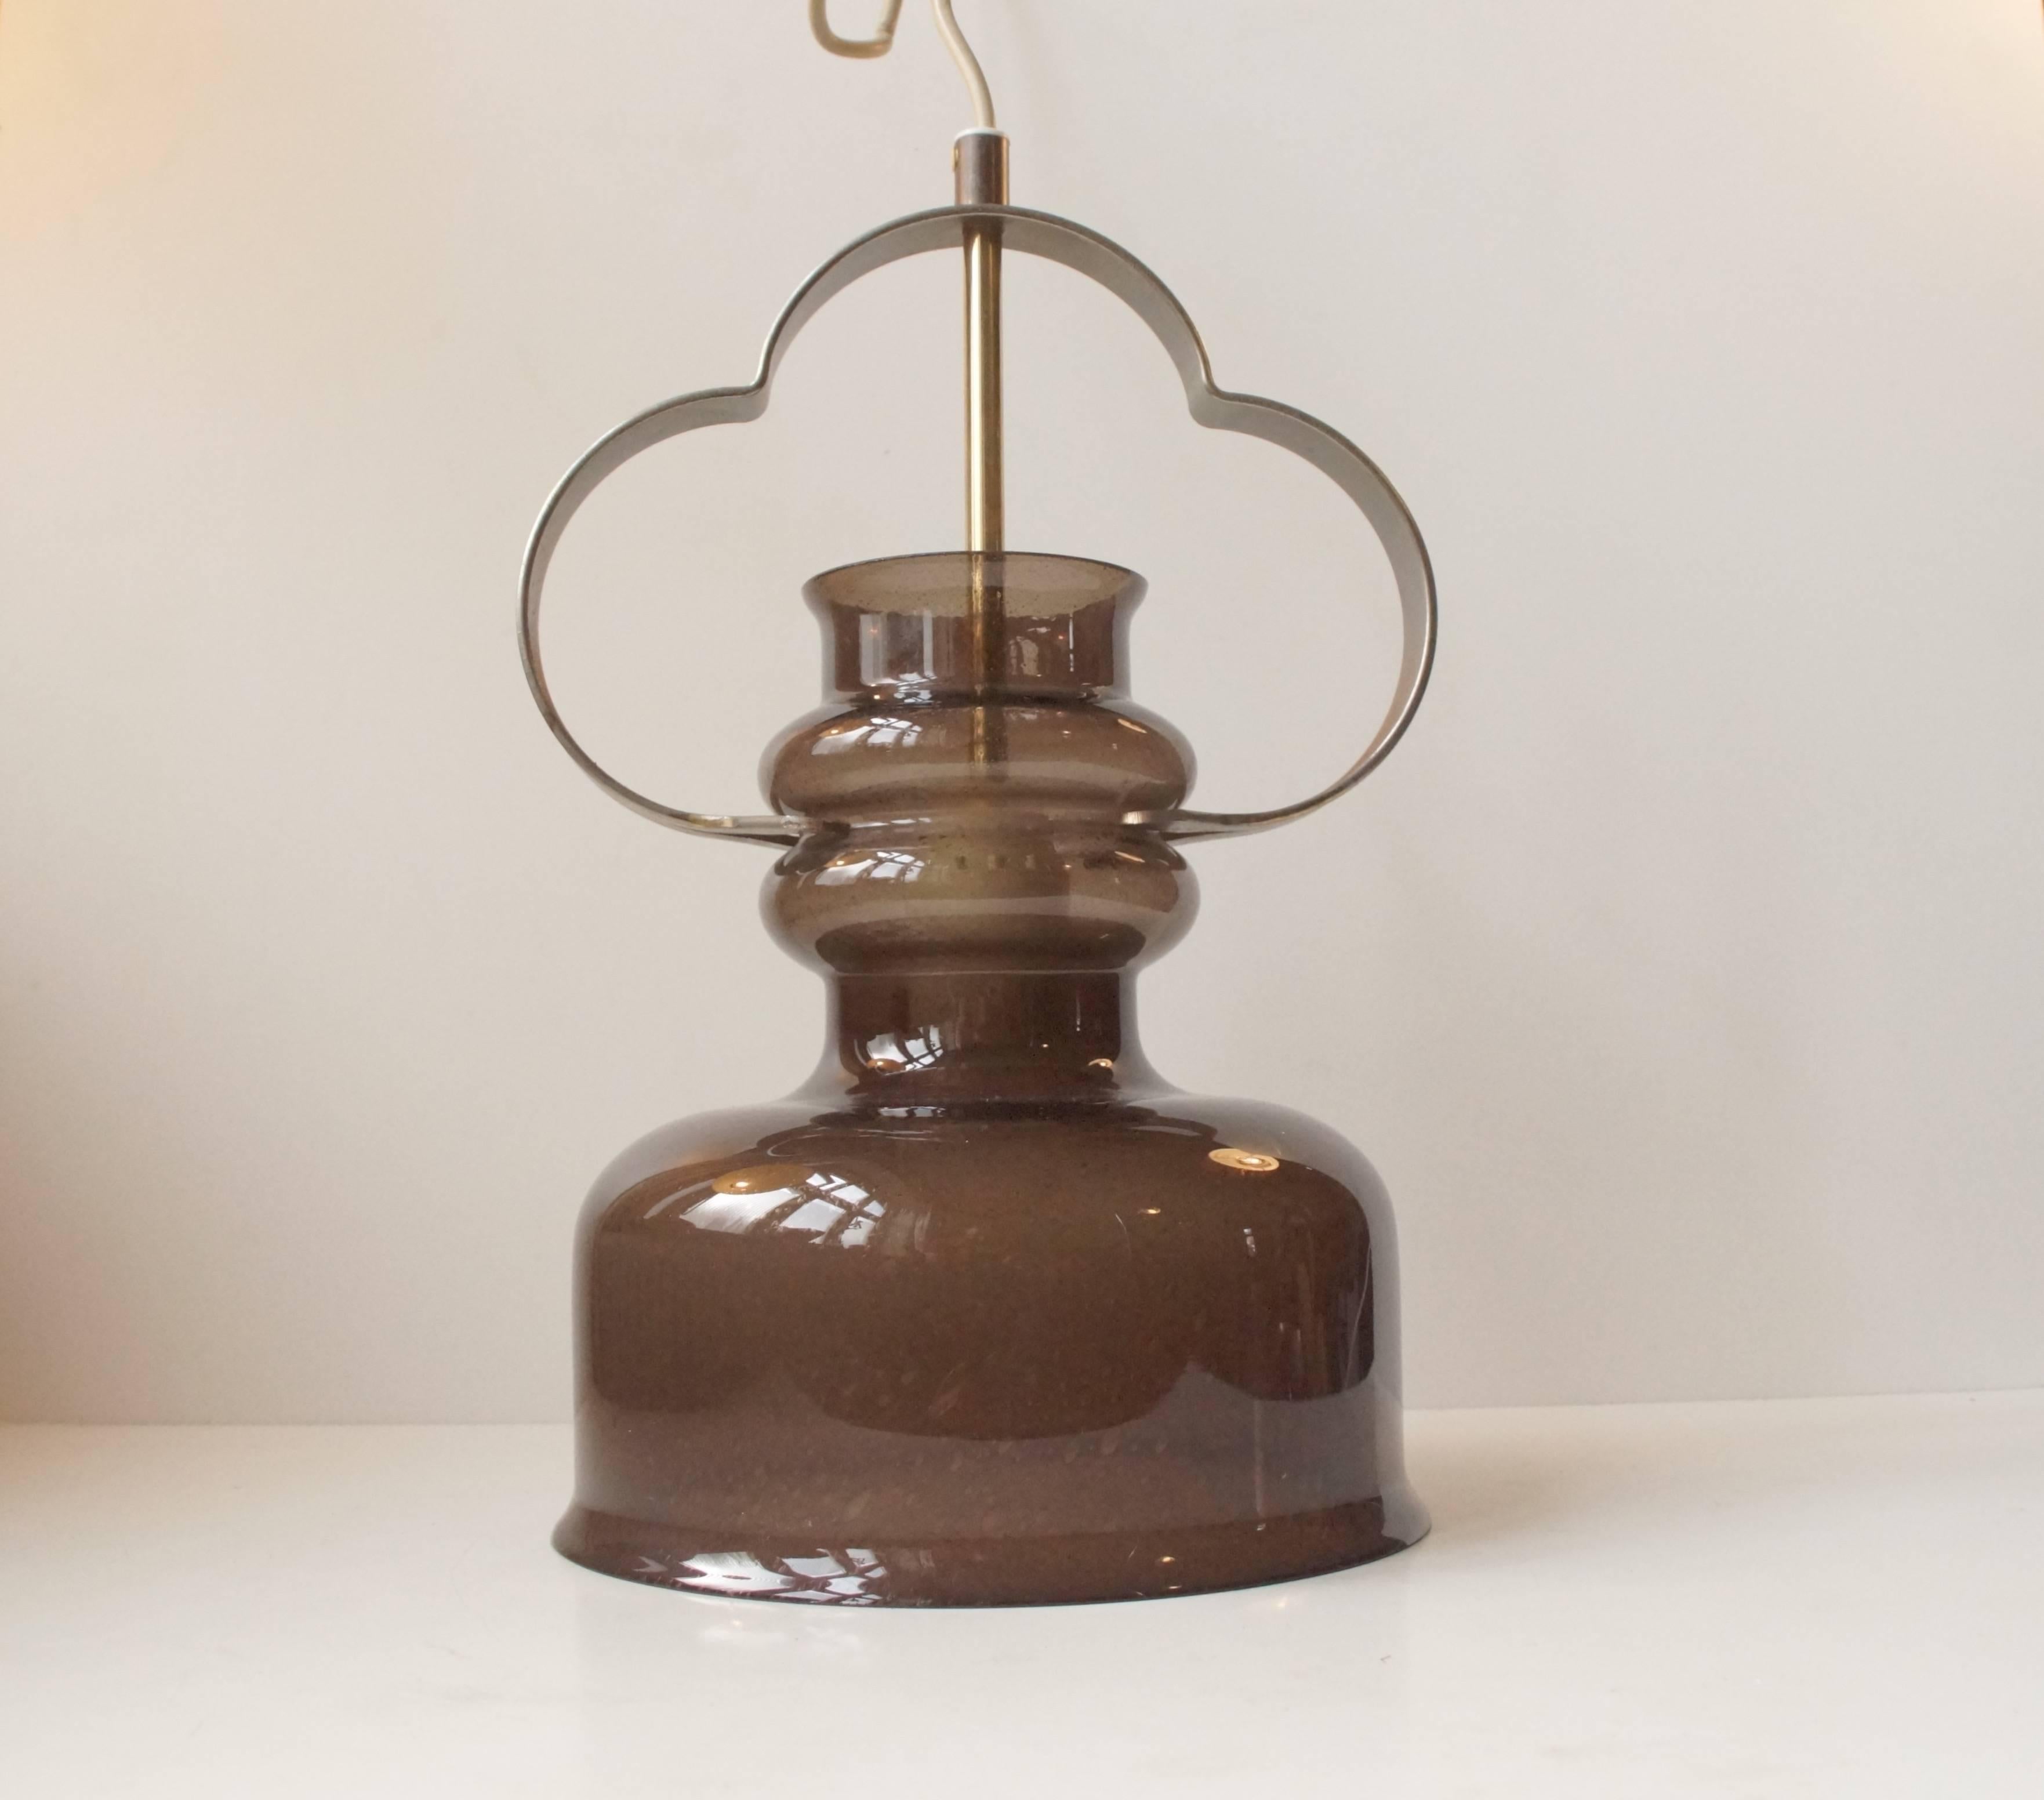 Rare pendant lamp in 'Smokey' hand blown brown glass with watery bubbles. The top part of the lamp is shapes as a three clover, bringing you good luck and prosperity when Lid:-). Measurements: H 13 inches (33 cm), D 8.2 inches (21 cm).